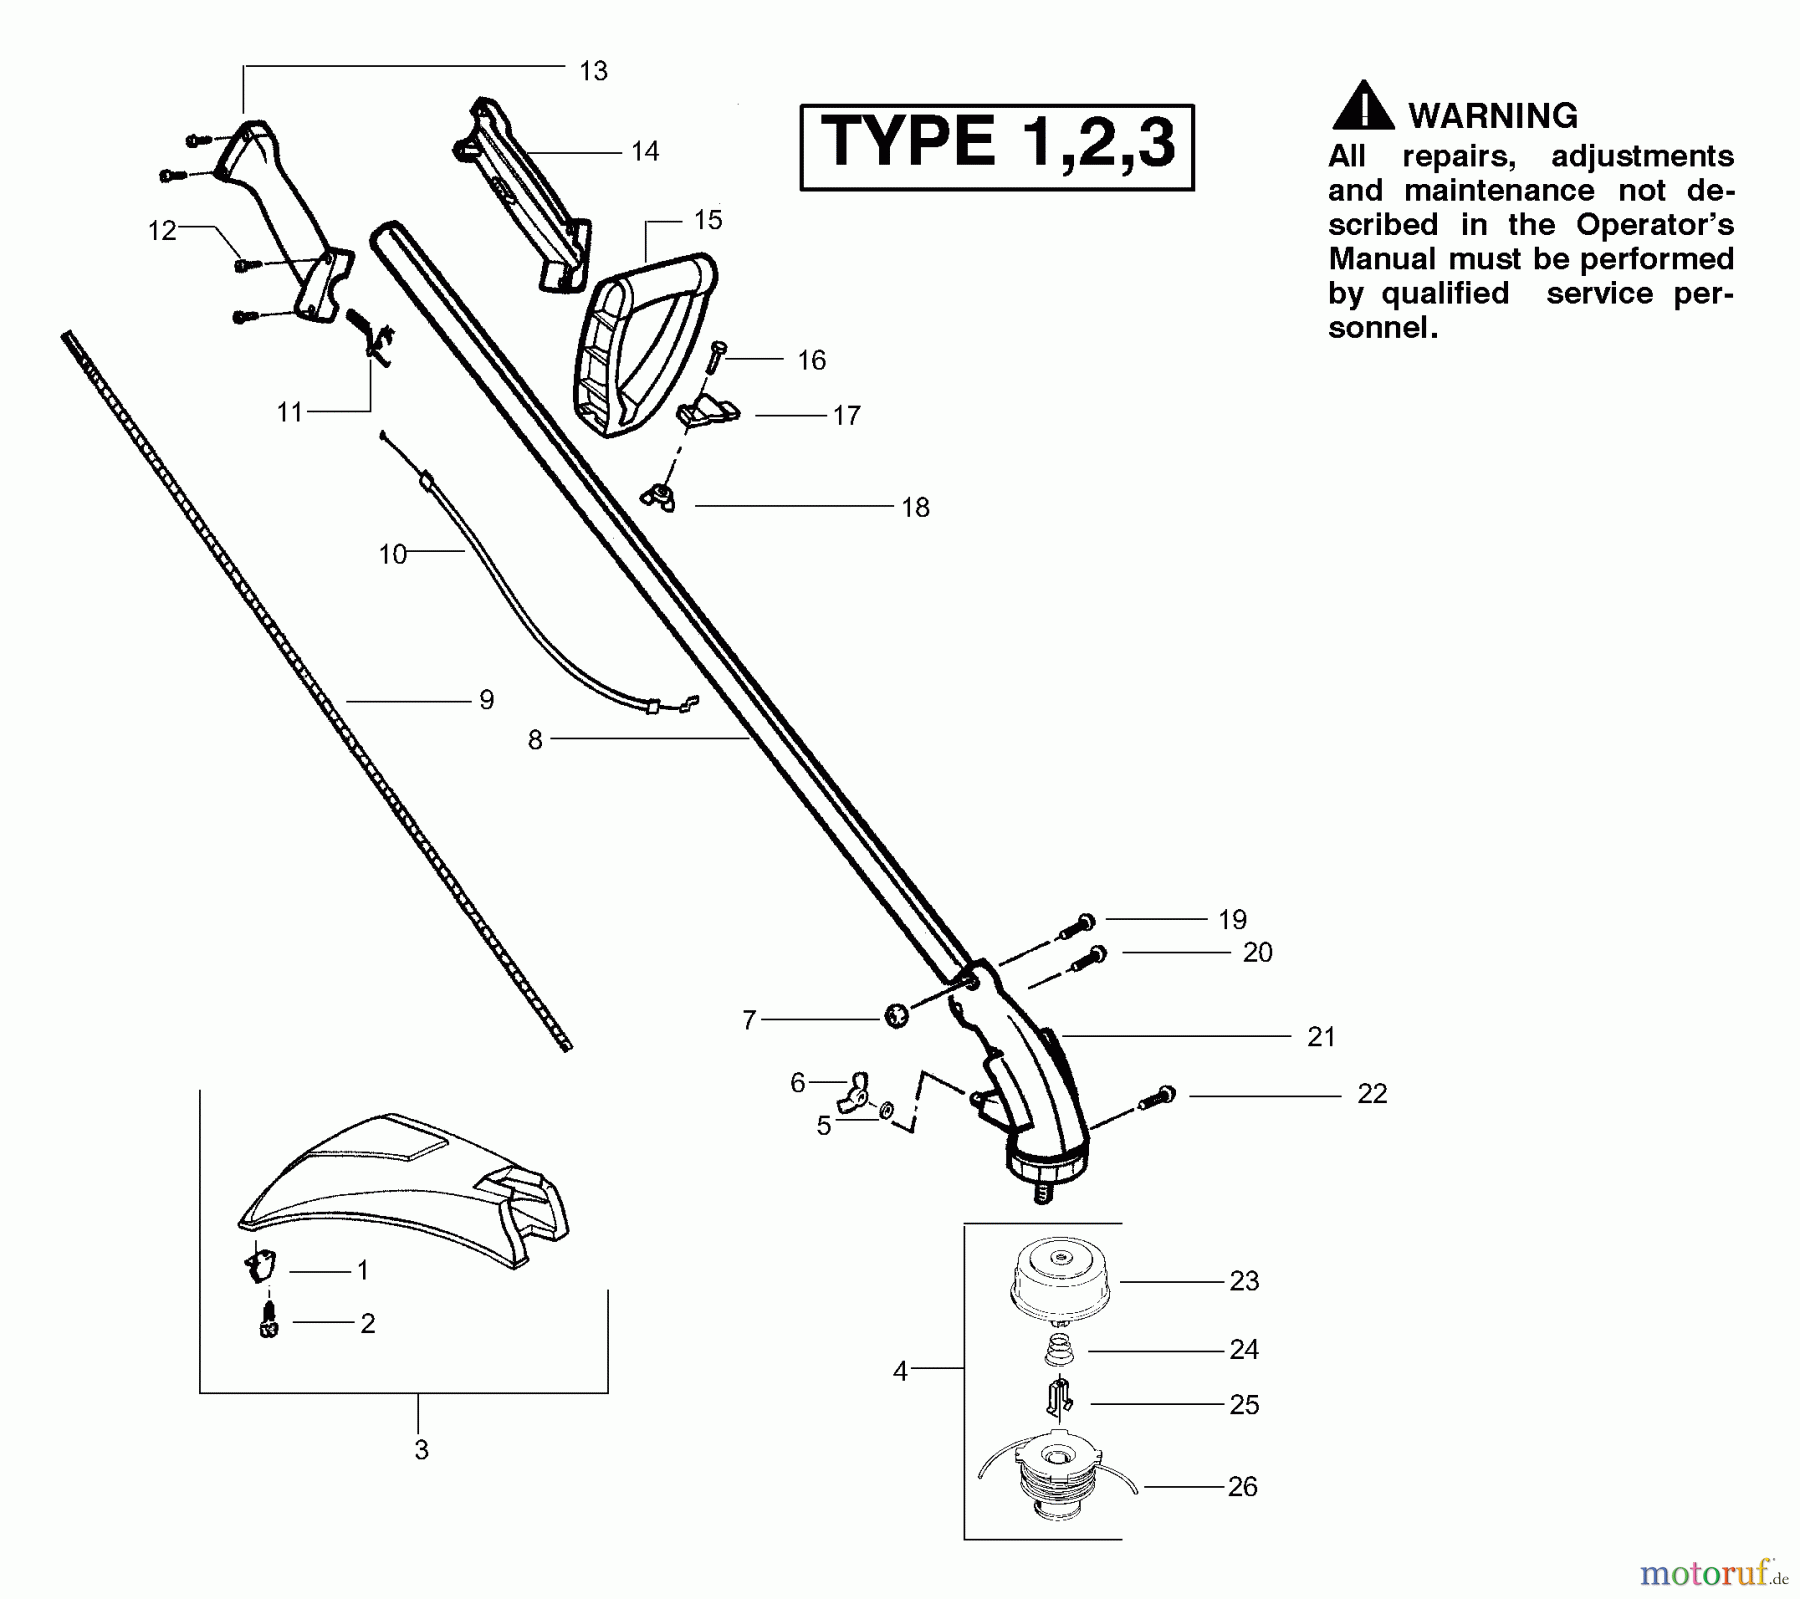  Poulan / Weed Eater Motorsensen, Trimmer SST (Type 1) - Weed Eater Featherlite LE String Trimmer Drive Shaft & Cutting Head